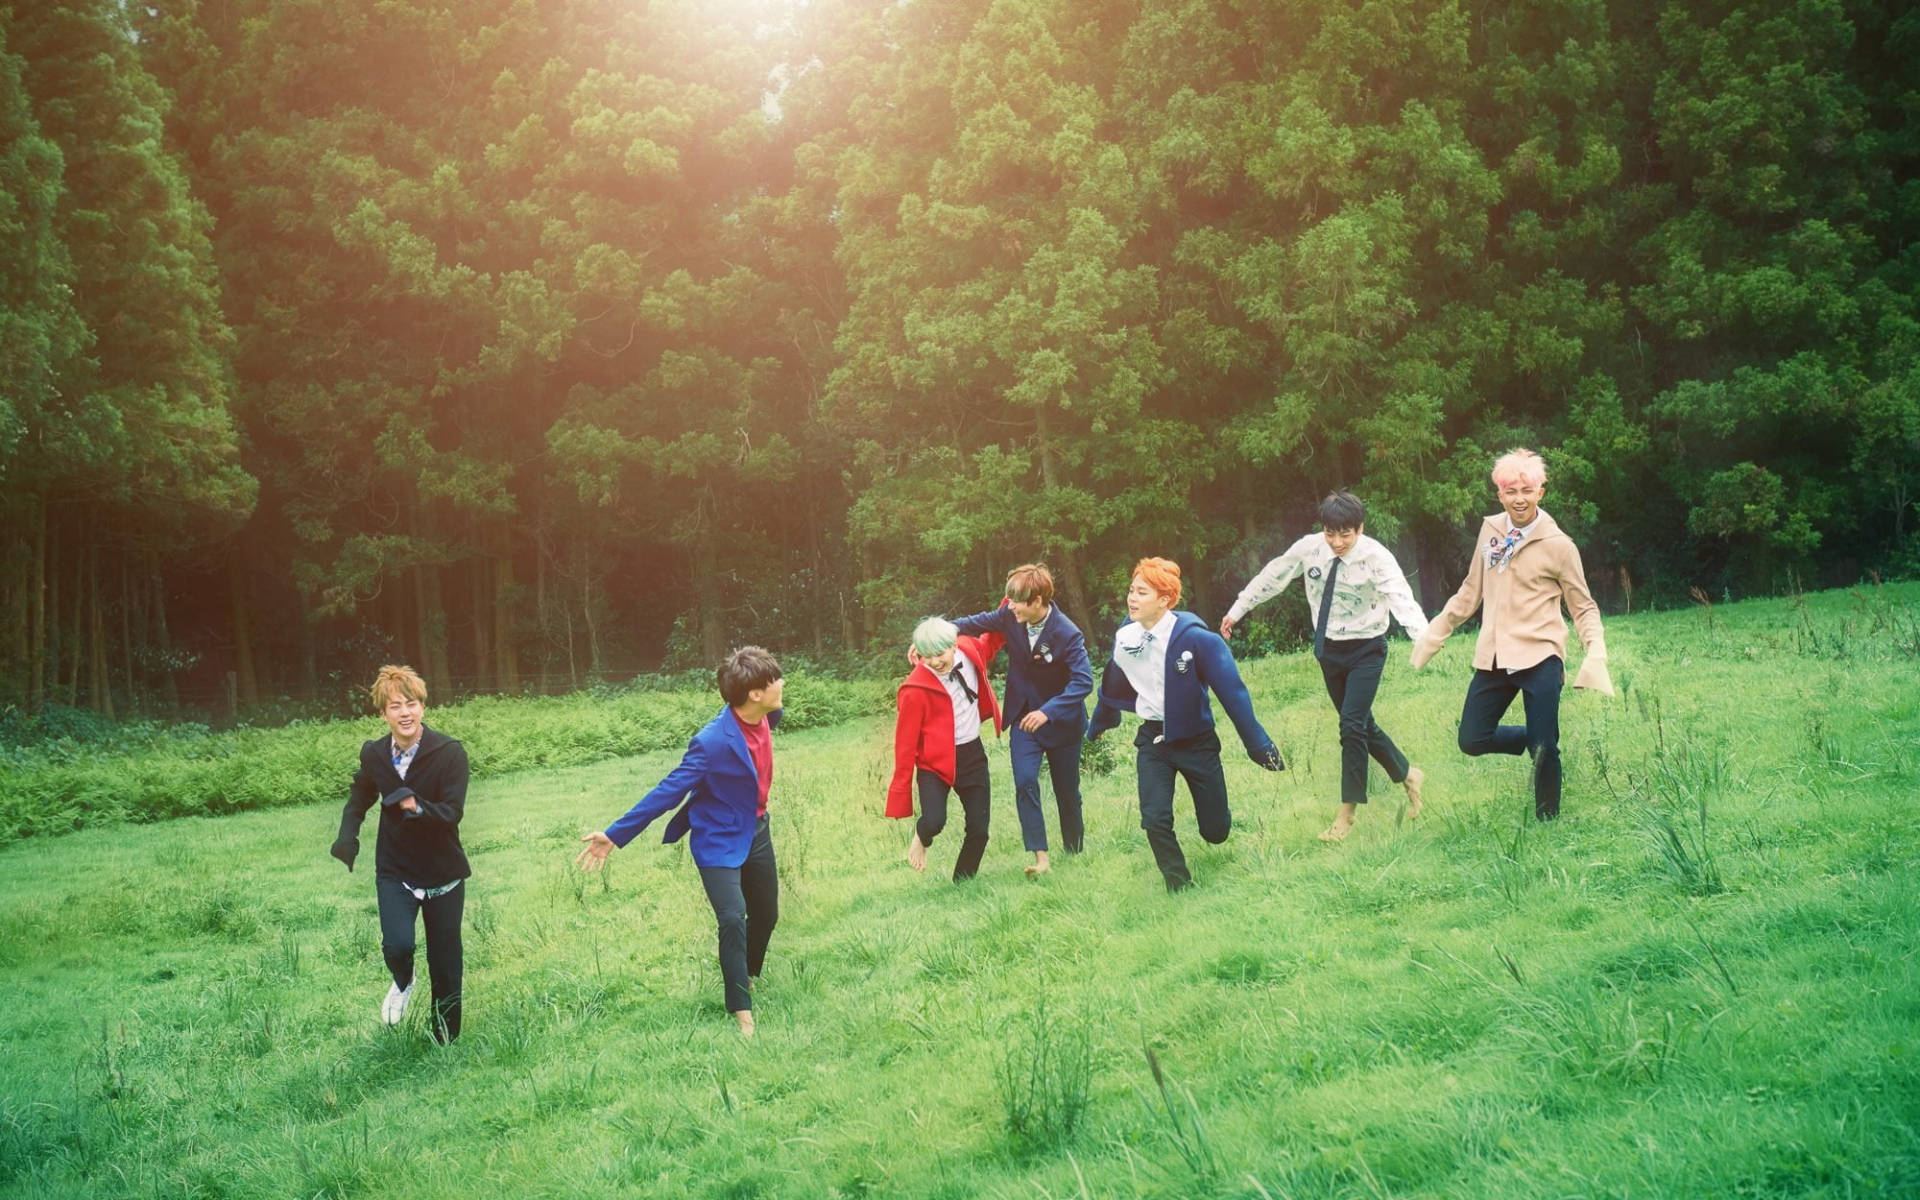 Bts Group Photo In Green Field